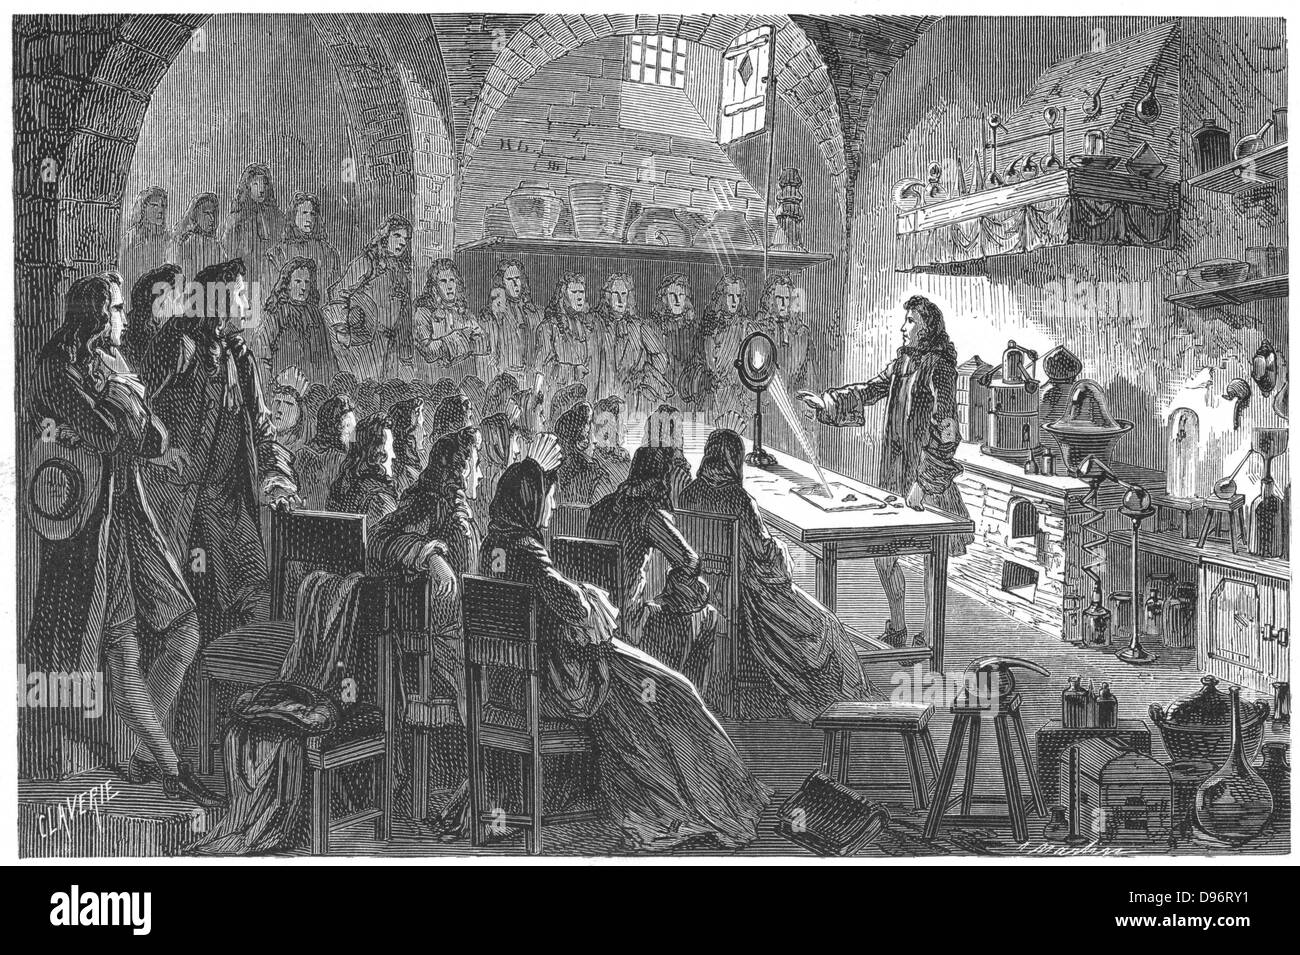 Nicolas Lemery (1645-1715) French physician and chemist. Lemery giving a public lecture on chemistry in Paris, c1675. Engraving published Paris, 1874. Stock Photo